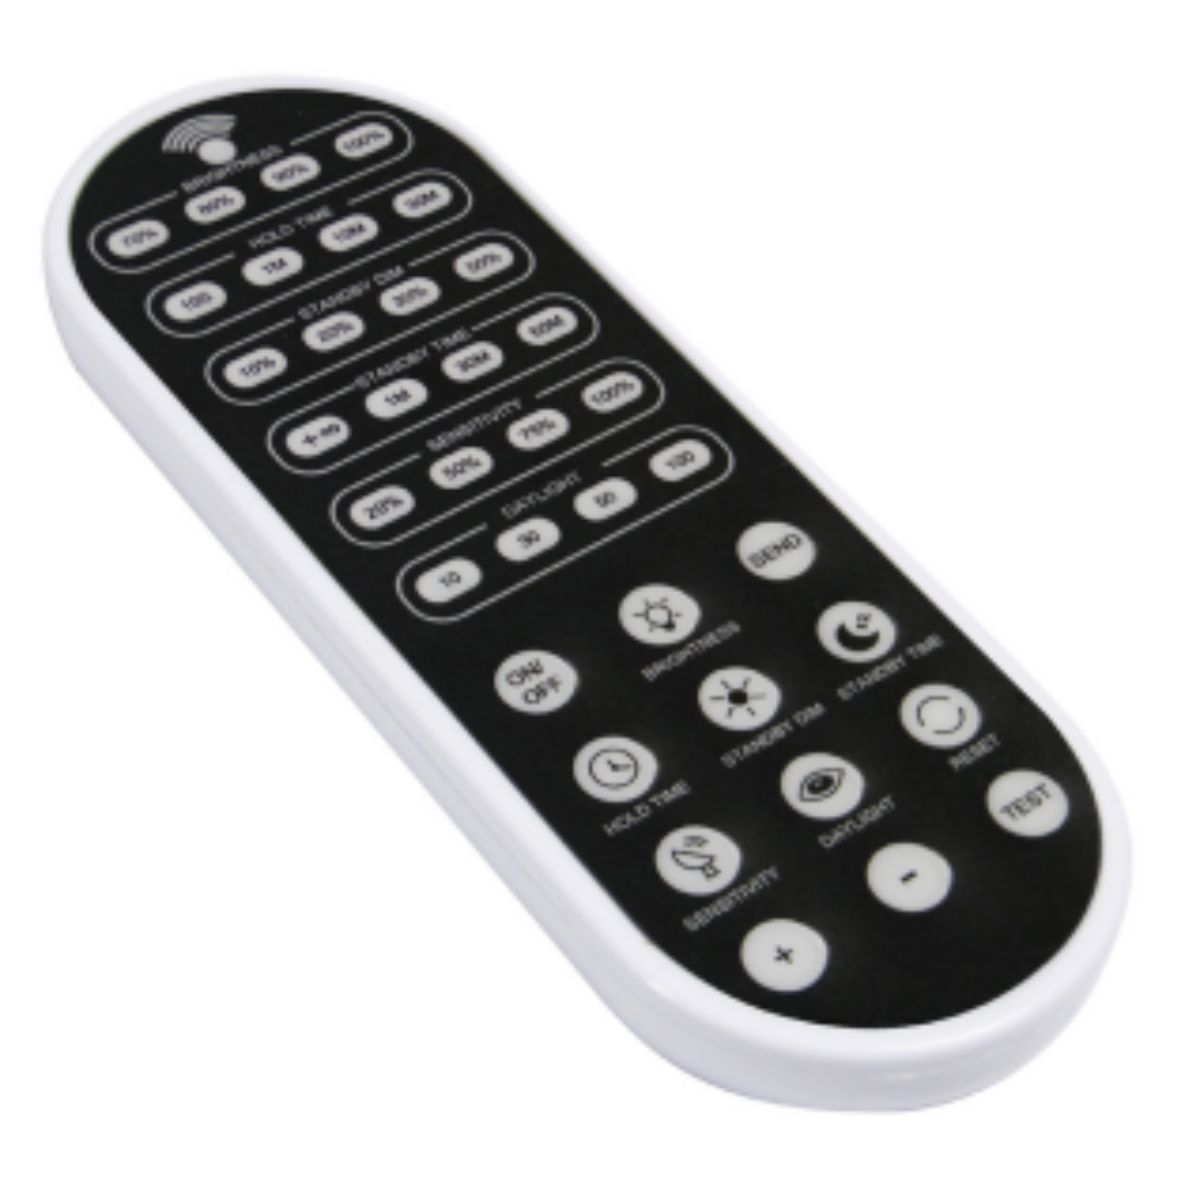 Keystone Remote Control For Dimmable Microwave/PIR Sensor